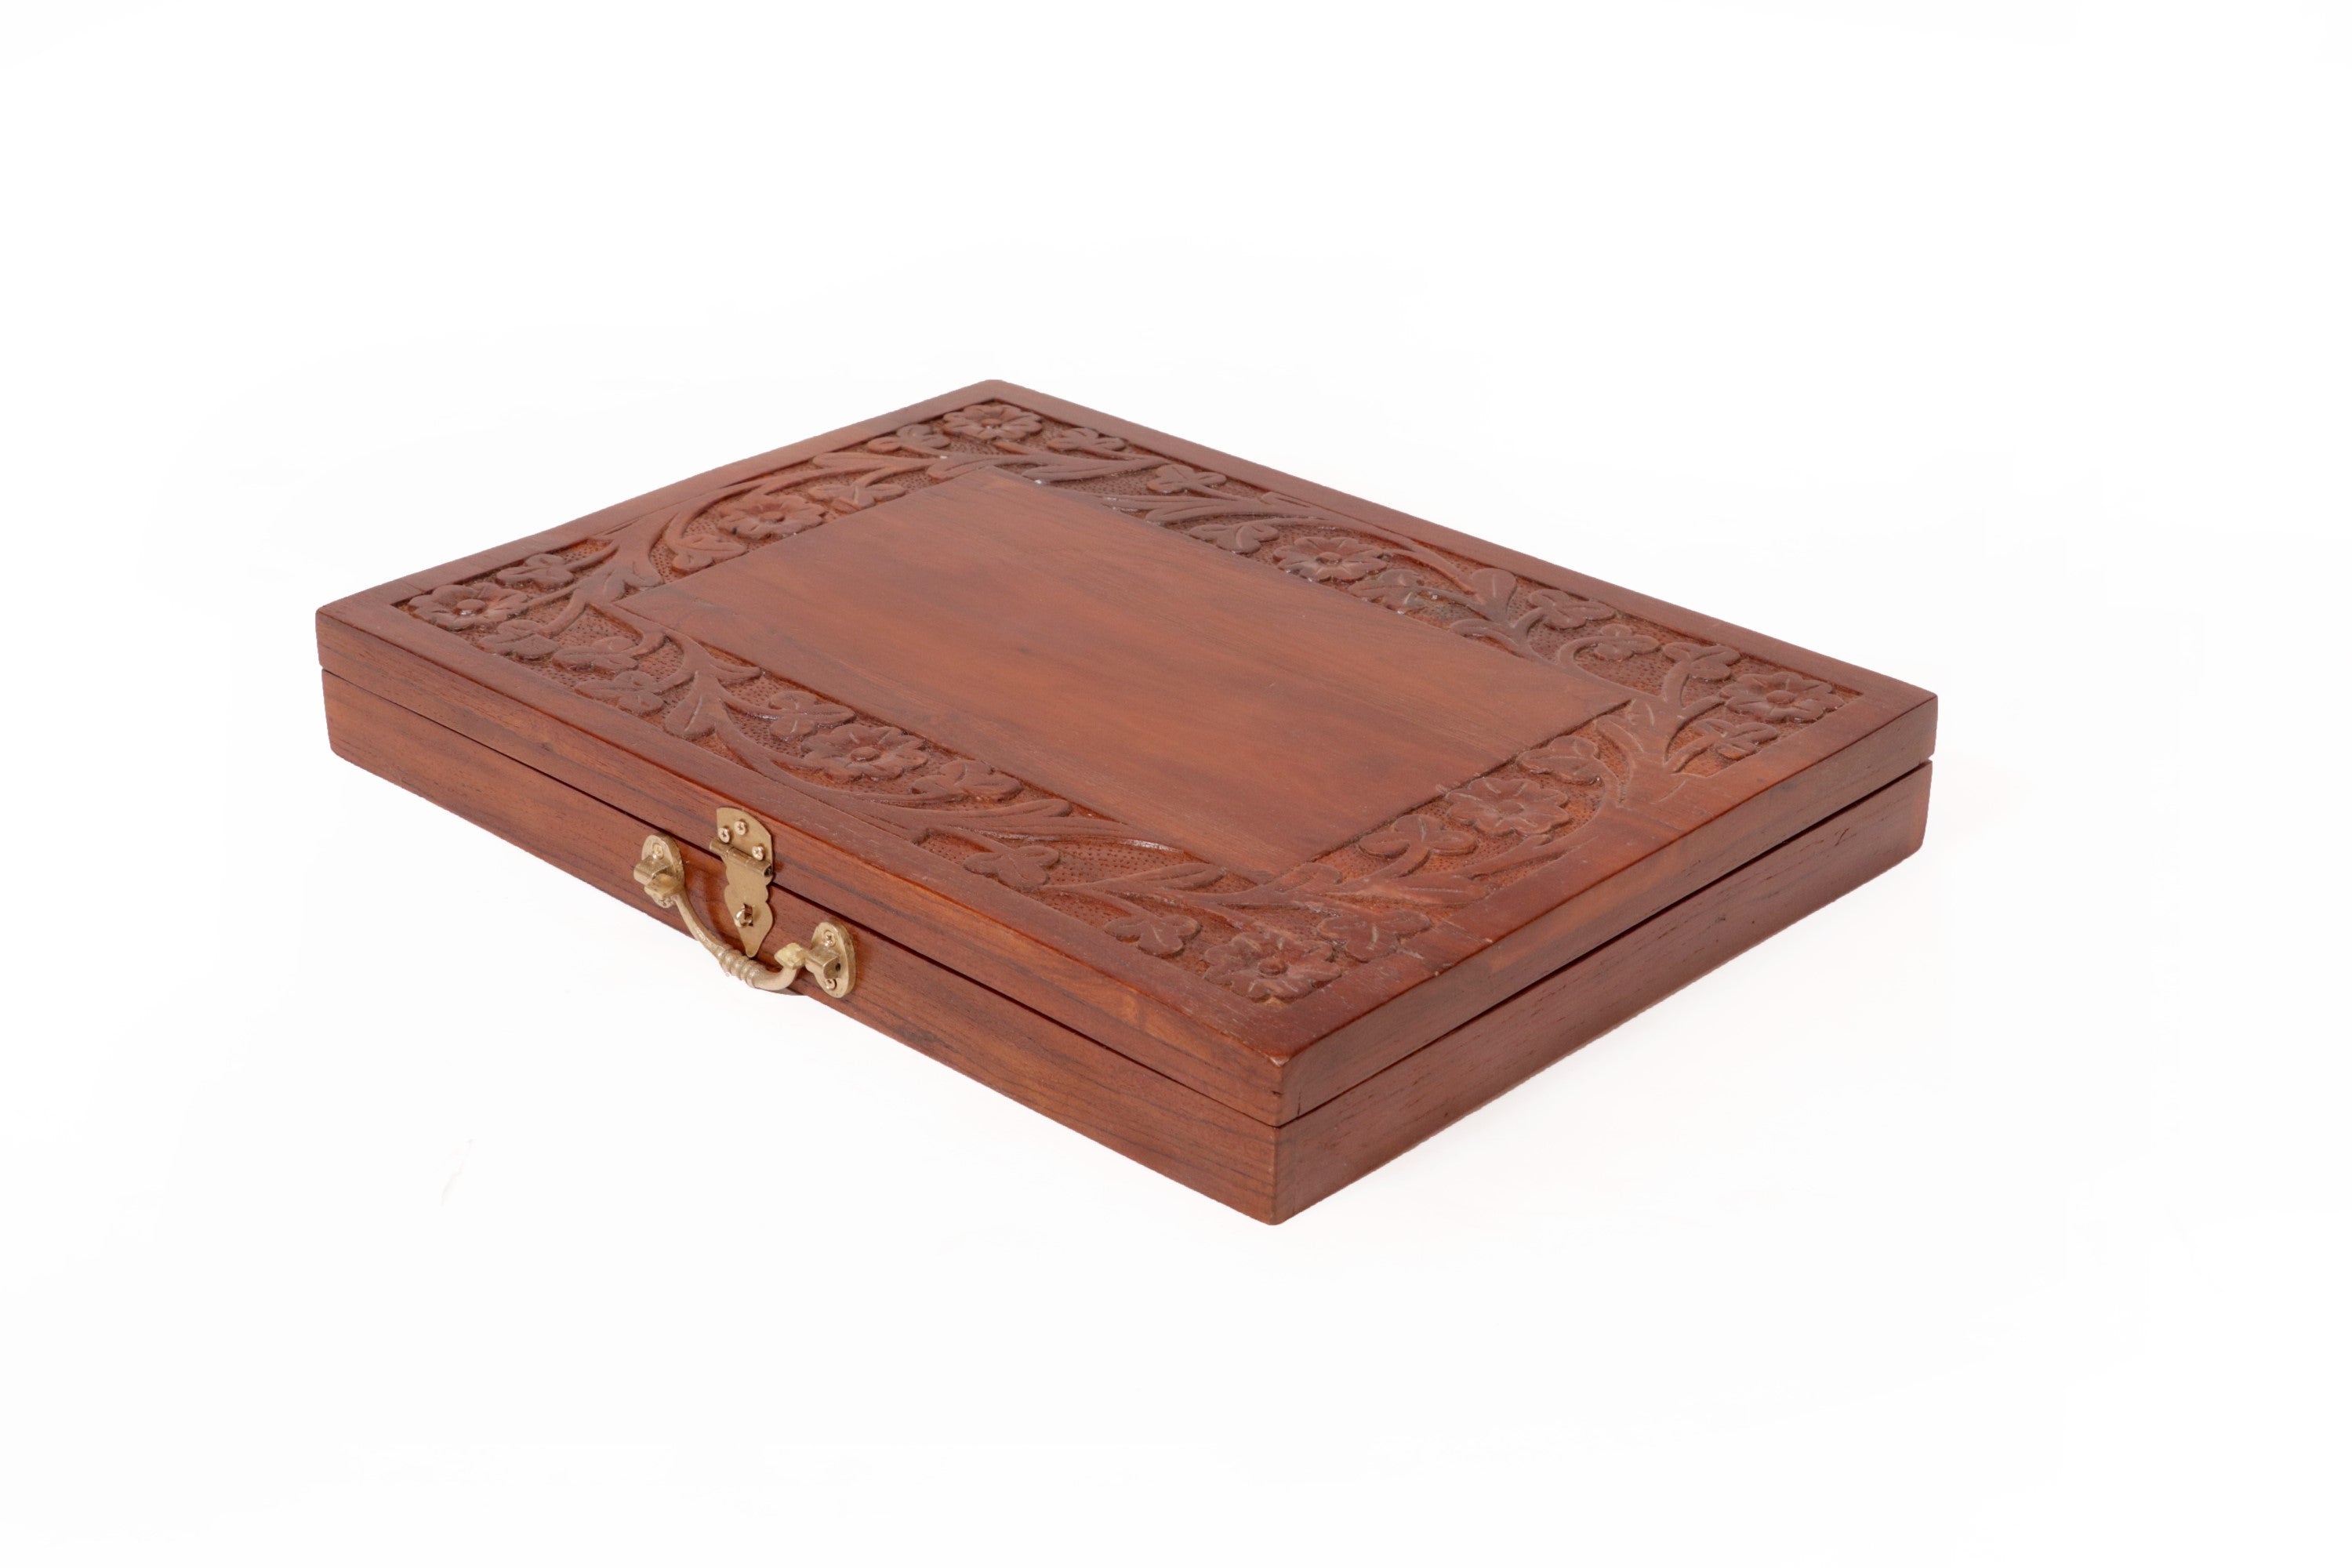 Wooden Carved Flower Petal Box Wooden Box